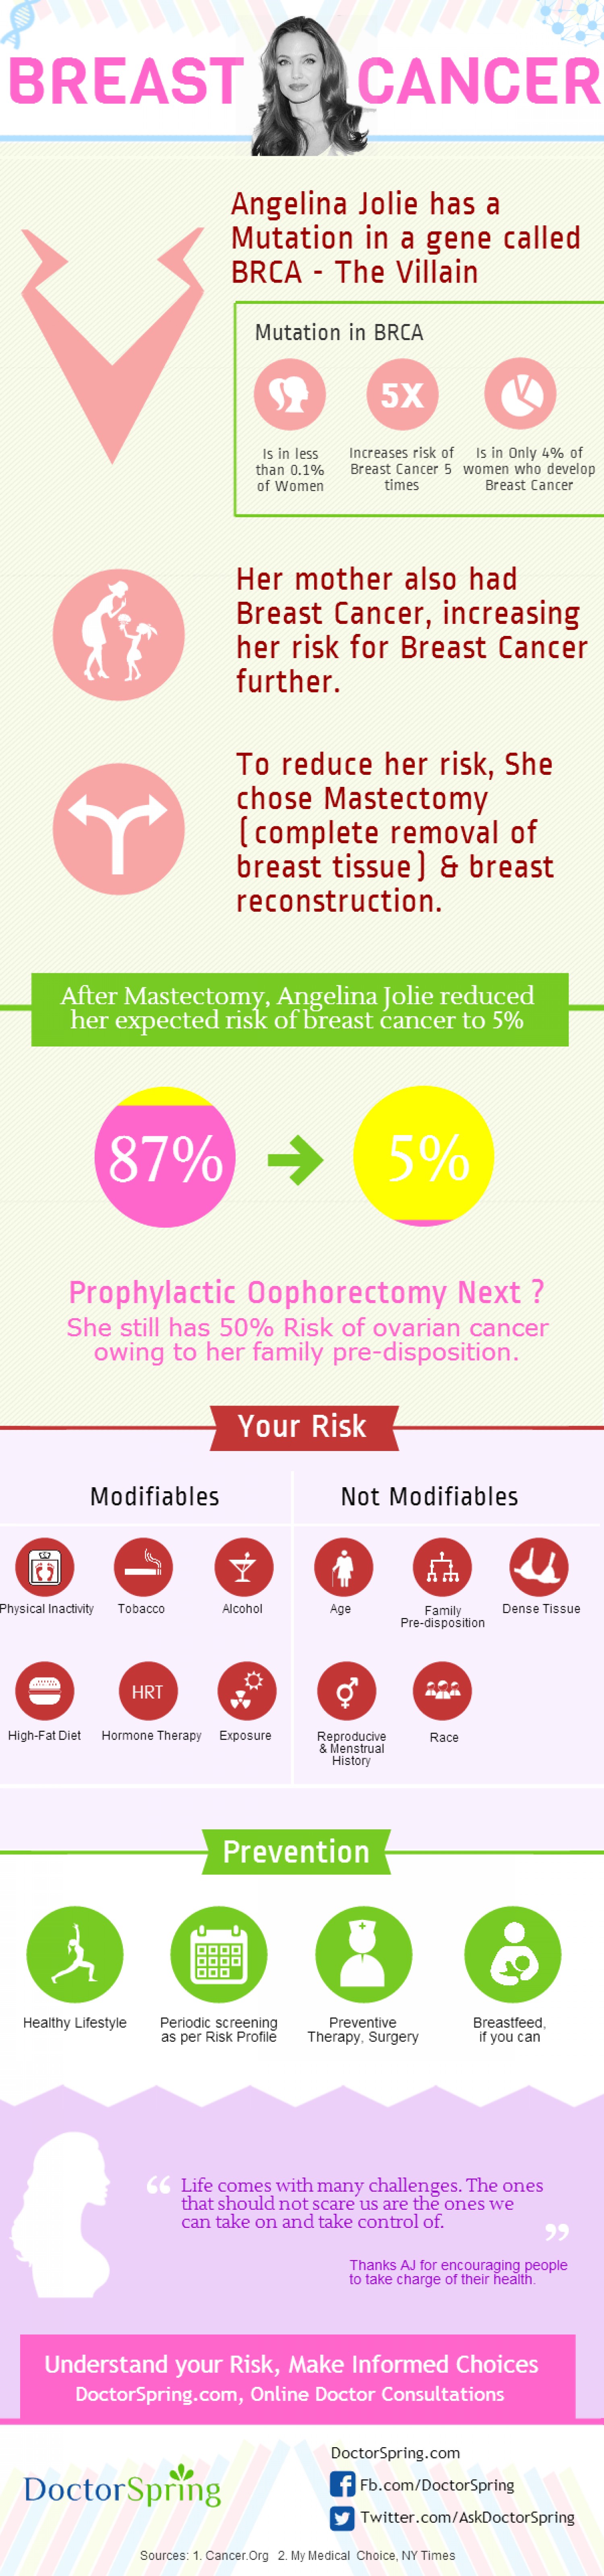 12. Breast Cancer Risk to Angelina Jolie